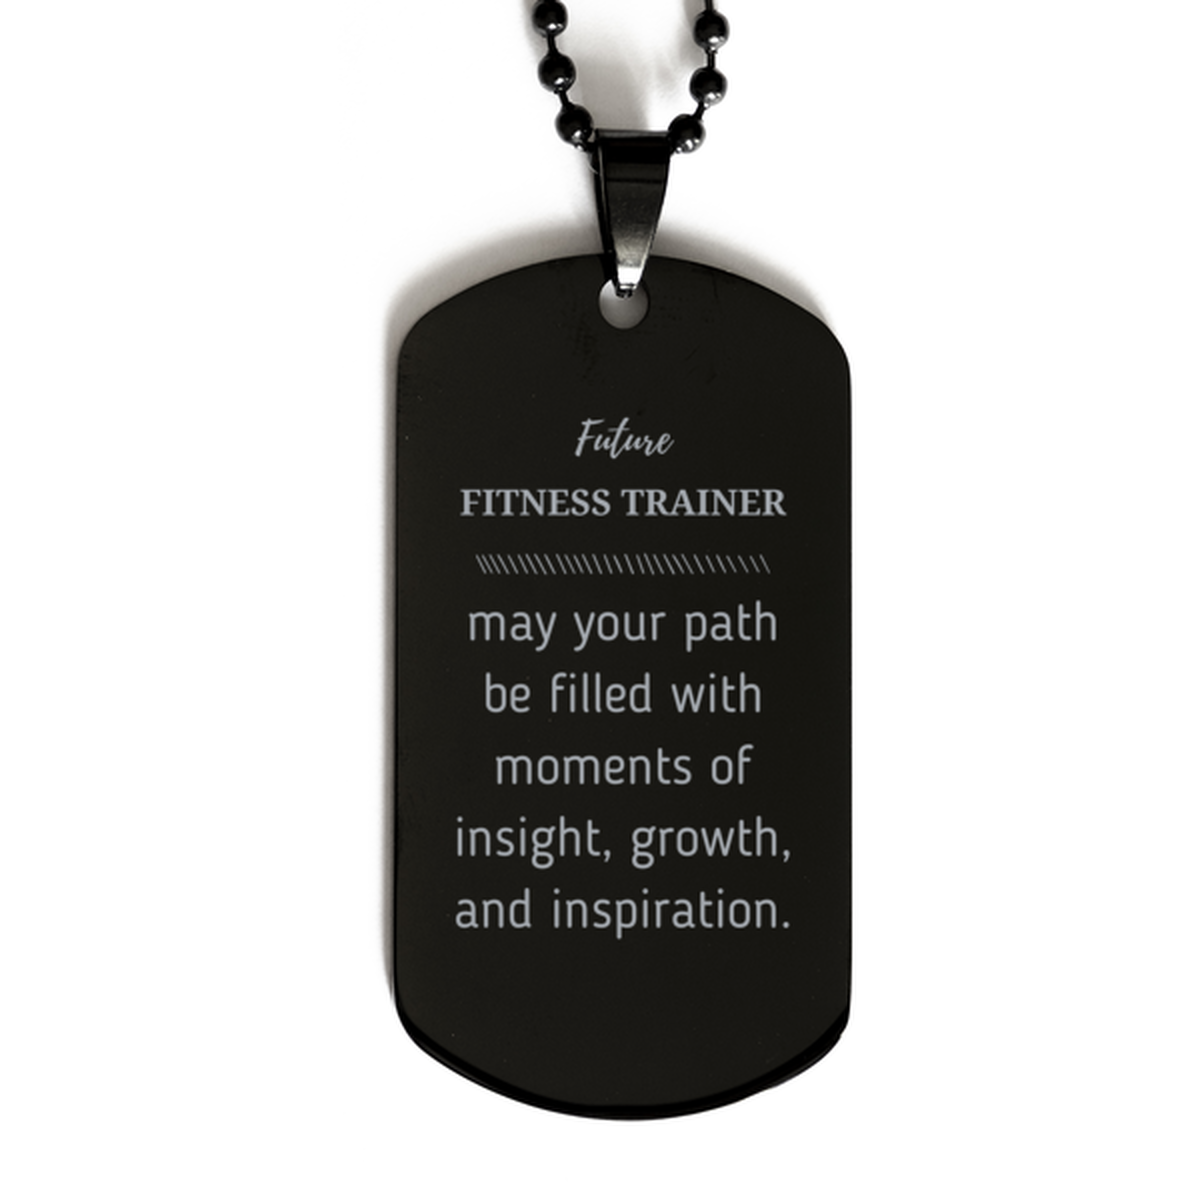 Future Fitness Trainer Gifts, May your path be filled with moments of insight, Graduation Gifts for New Fitness Trainer, Christmas Unique Black Dog Tag For Men, Women, Friends